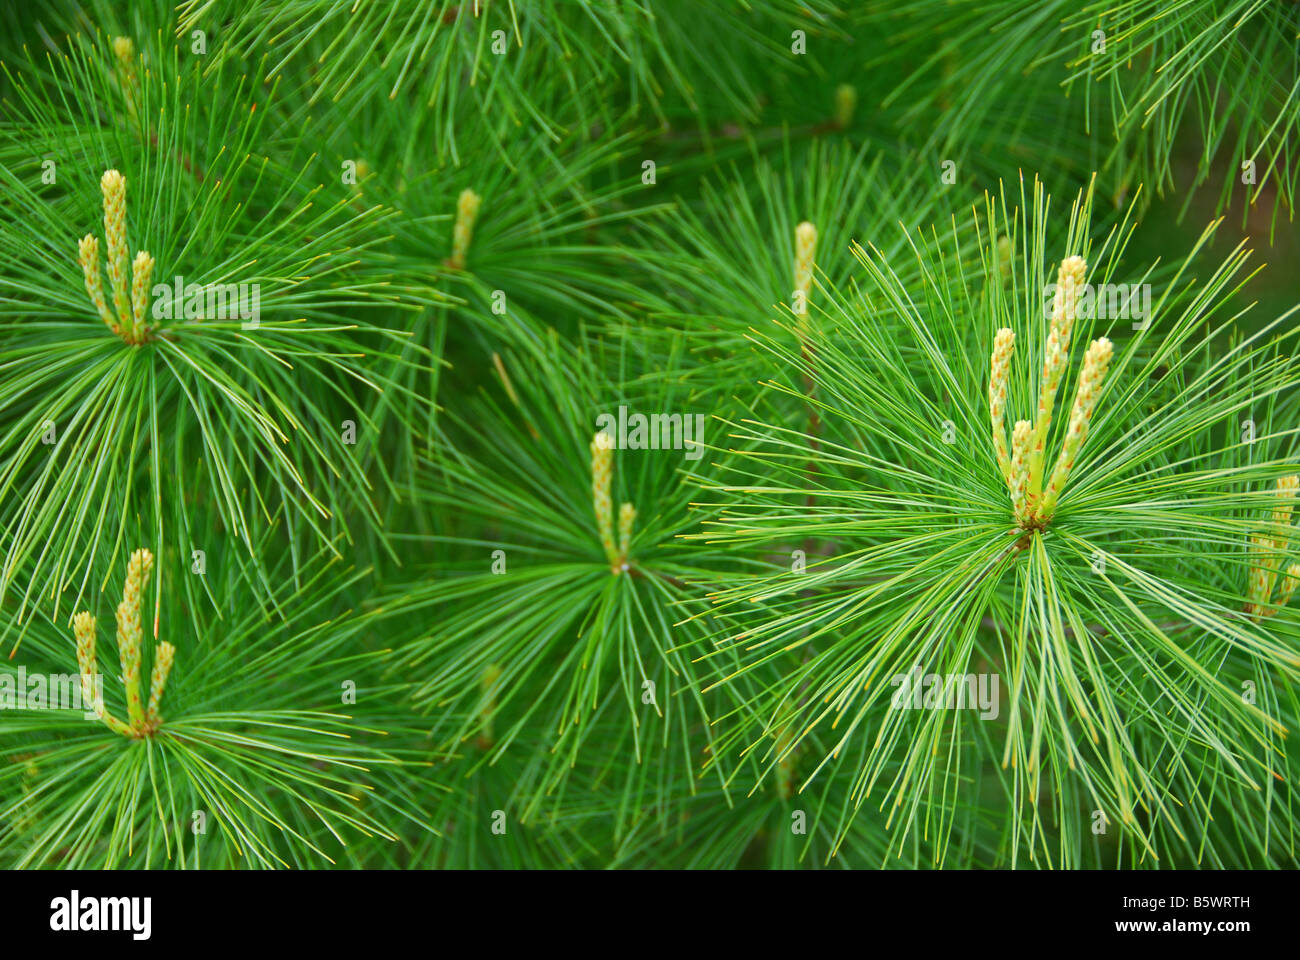 Background of young new pine needles in the spring Stock Photo